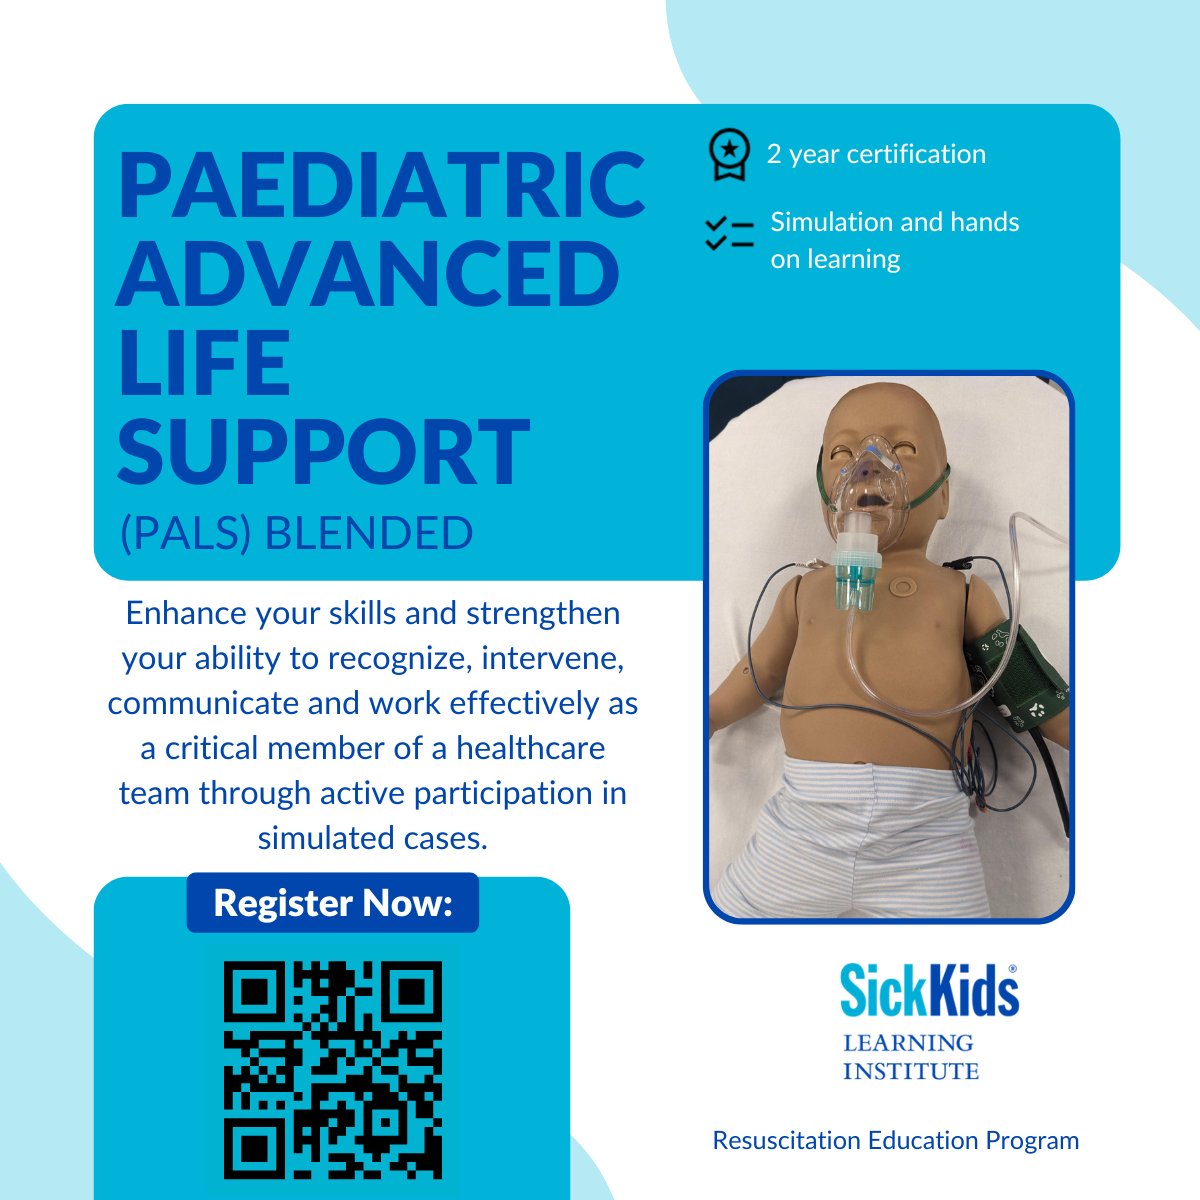 Elevate your paediatric emergency skills with our PALS blended course on April 12! Developed by @HeartandStroke & offered at SickKids' Simulation Centre. Register now: shorturl.at/EFK35 #PALS #SKLearning